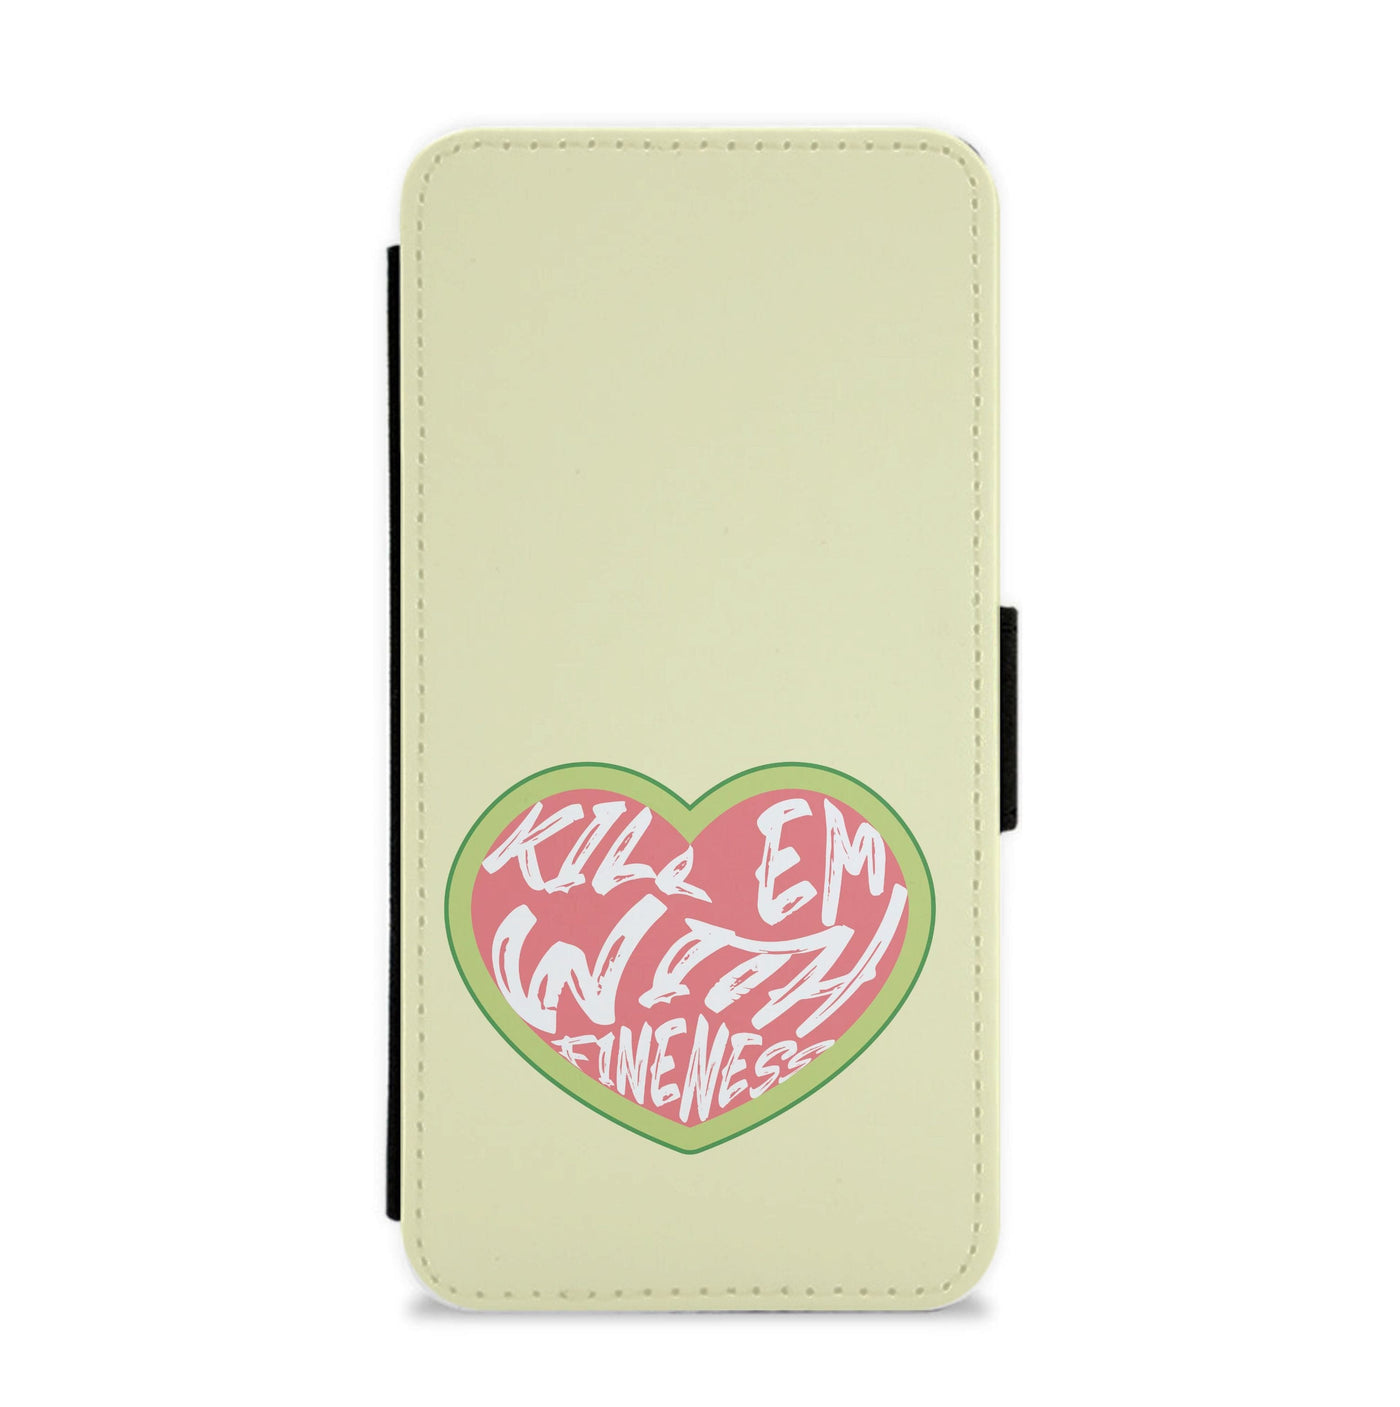 Kill Em With Kindness - Summer Quotes Flip / Wallet Phone Case